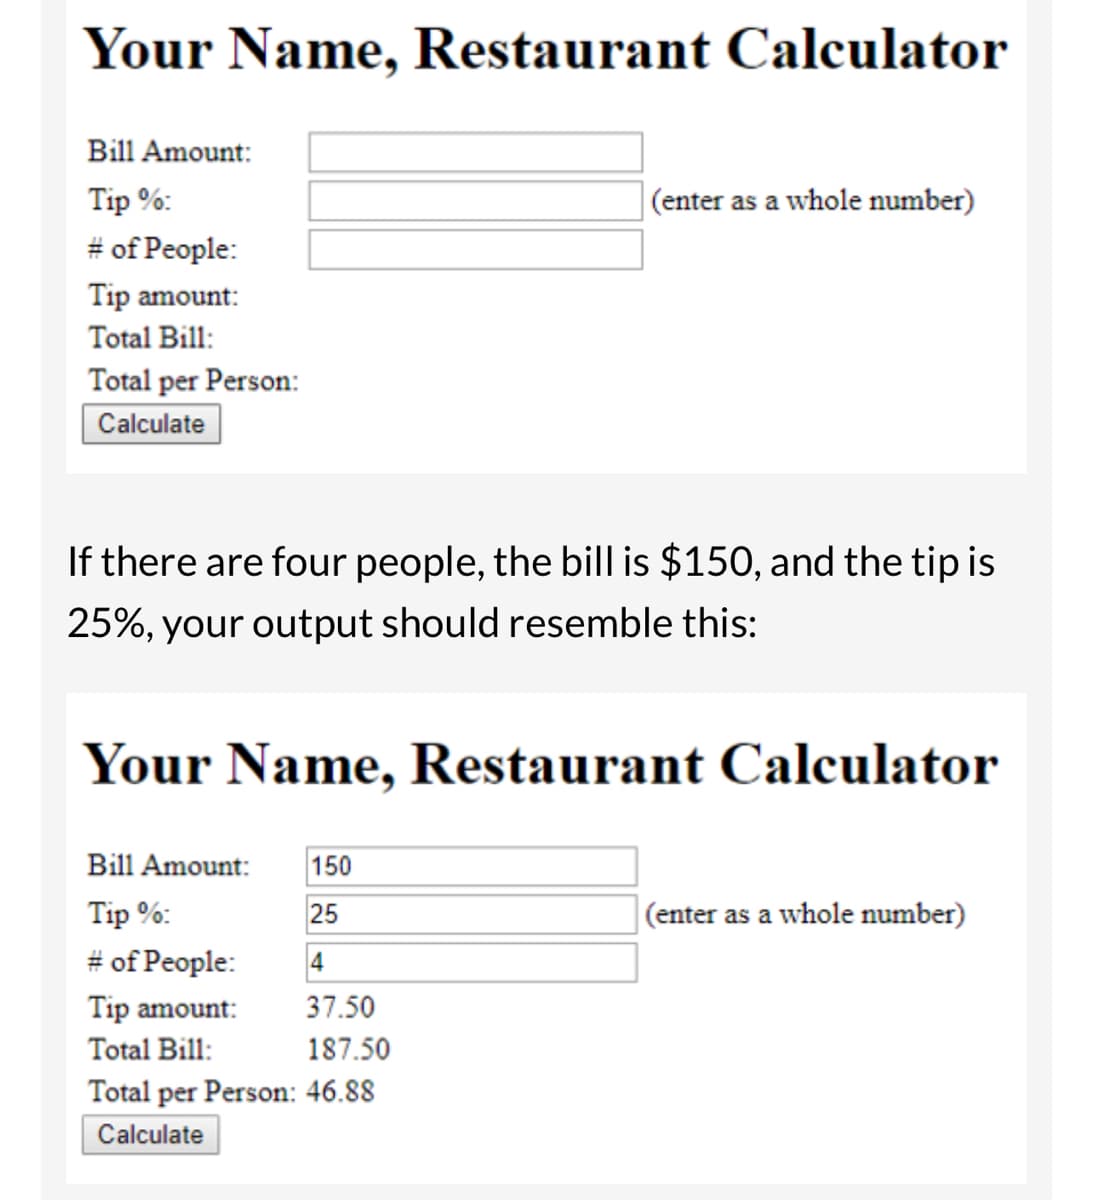 Your Name, Restaurant Calculator
Bill Amount:
Tip %:
# of People:
Tip amount:
Total Bill:
Total per Person:
Calculate
(enter as a whole number)
If there are four people, the bill is $150, and the tip is
25%, your output should resemble this:
Your Name, Restaurant Calculator
Bill Amount: 150
Tip %:
25
# of People:
4
Tip amount:
37.50
Total Bill:
187.50
Total per Person: 46.88
Calculate
(enter as a whole number)